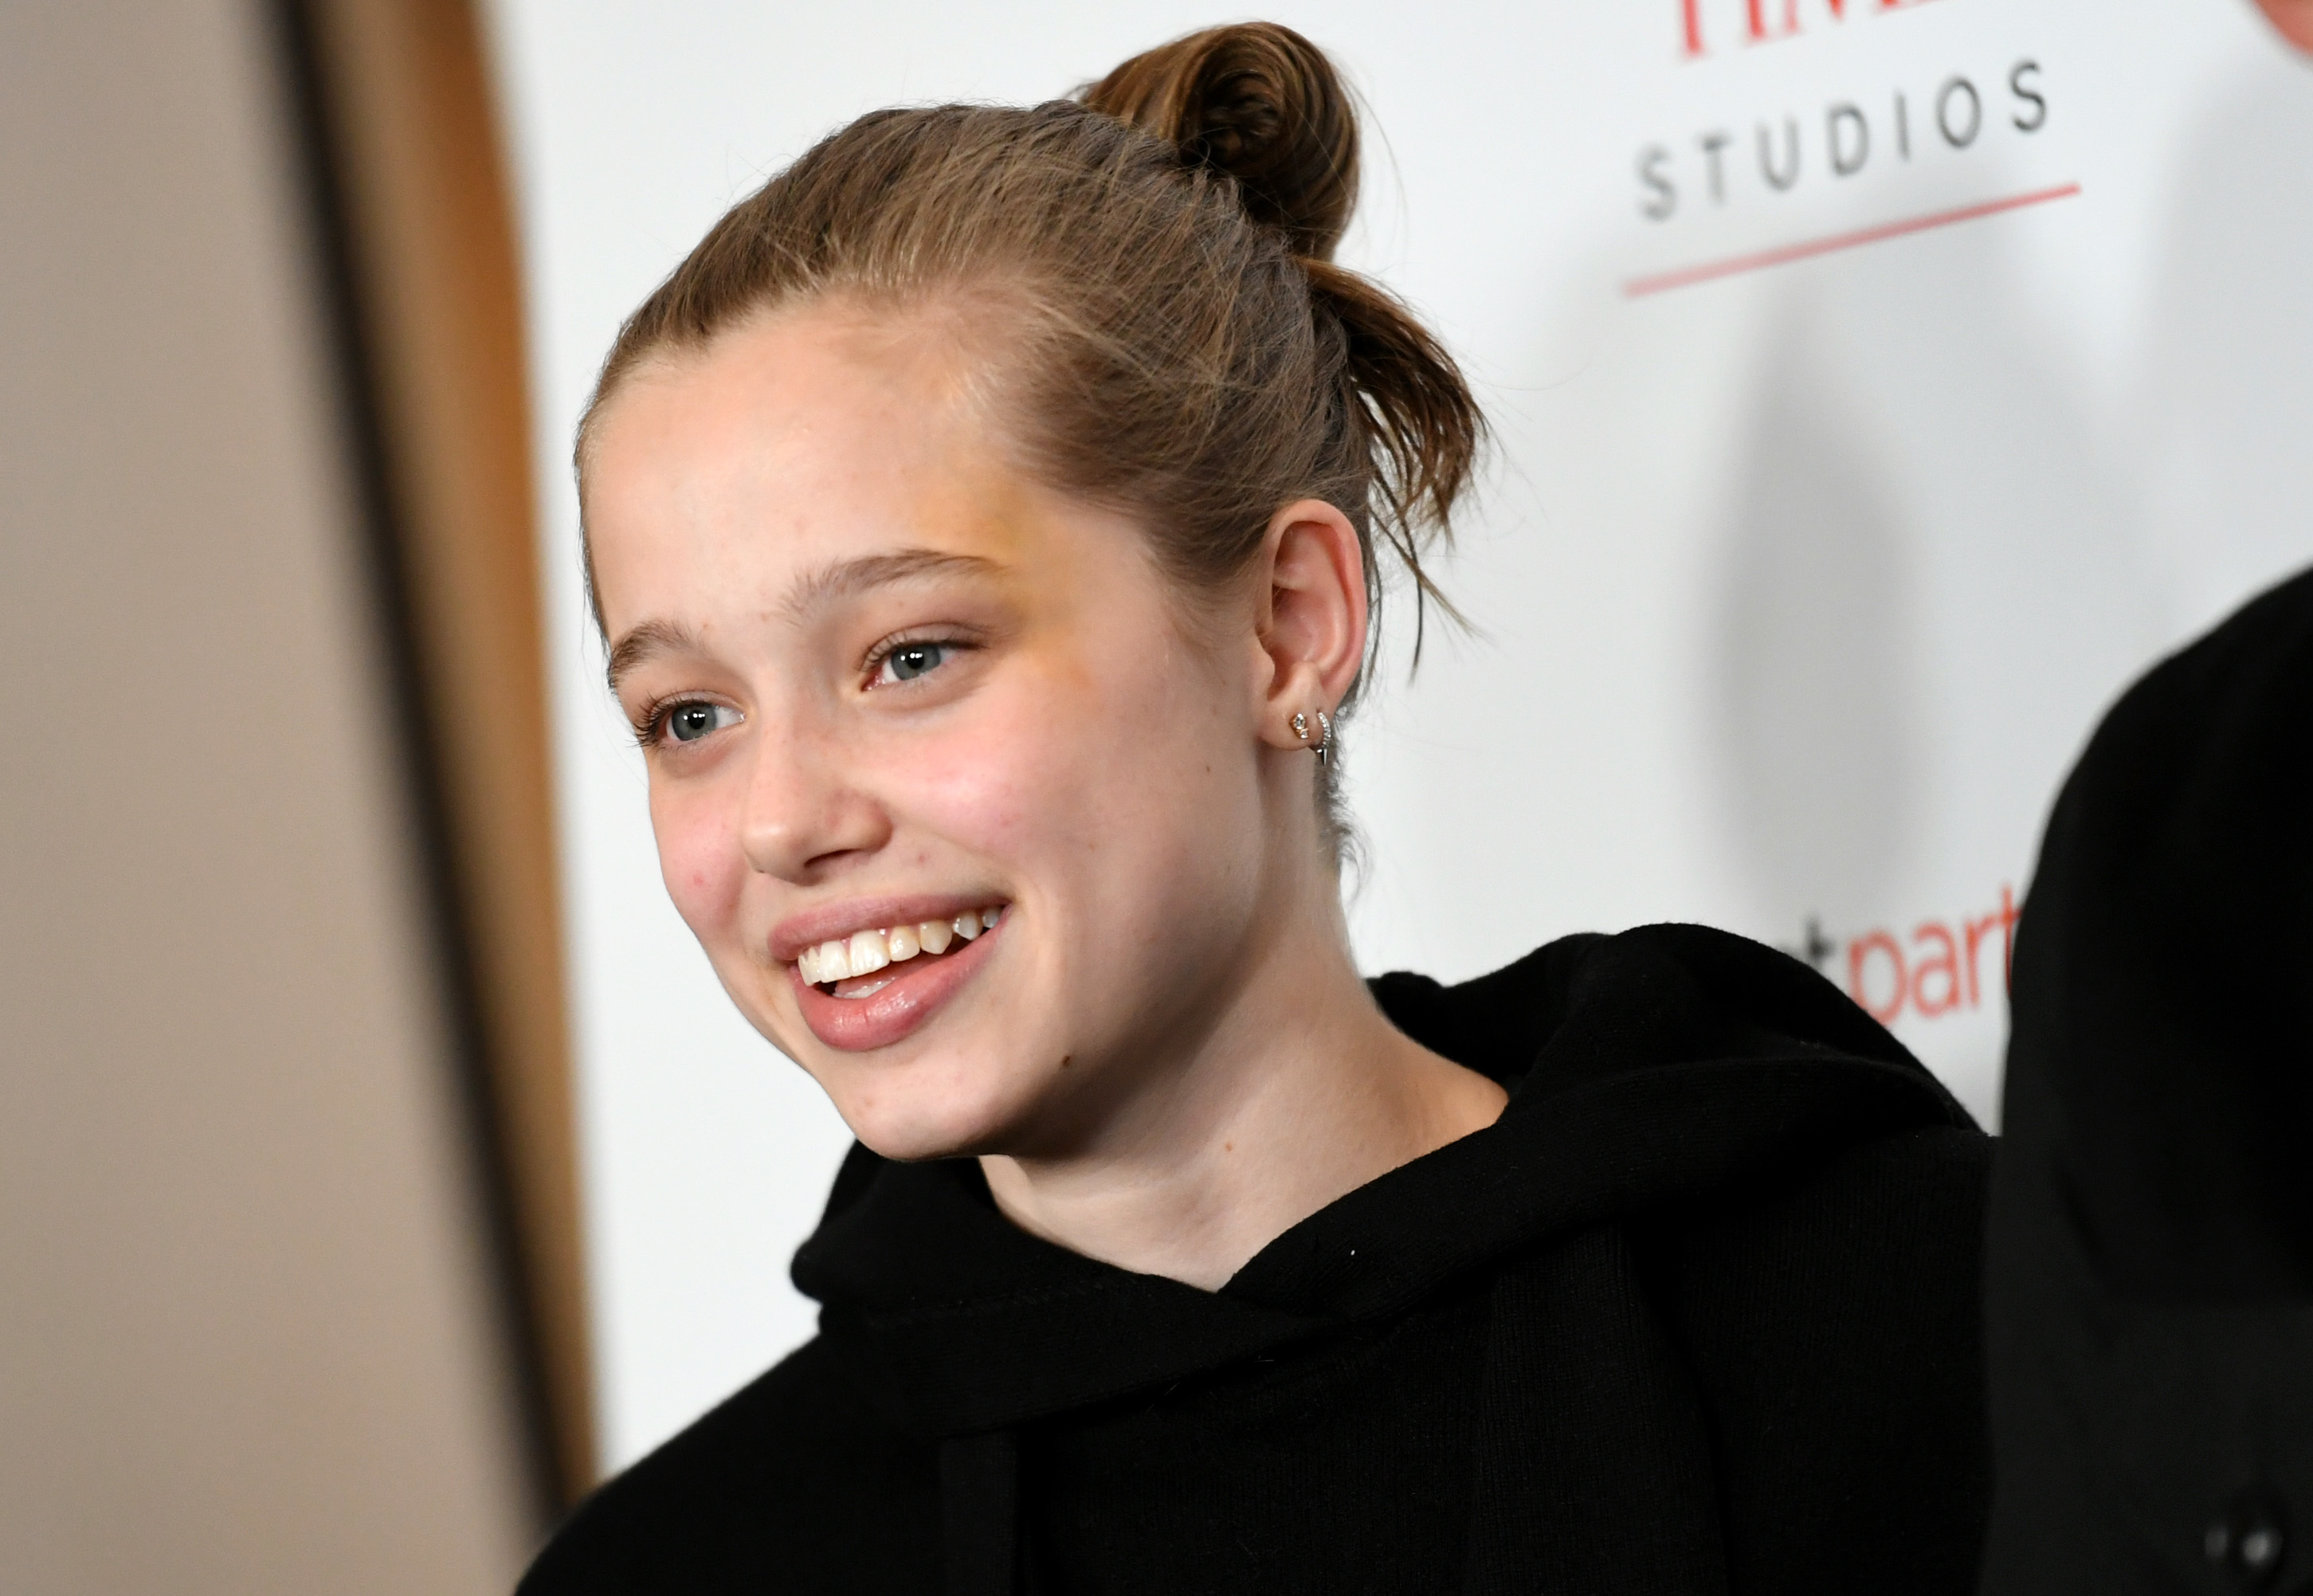 Shiloh Jolie smiles at a red carpet event, wearing a casual black hoodie with hair styled in a bun